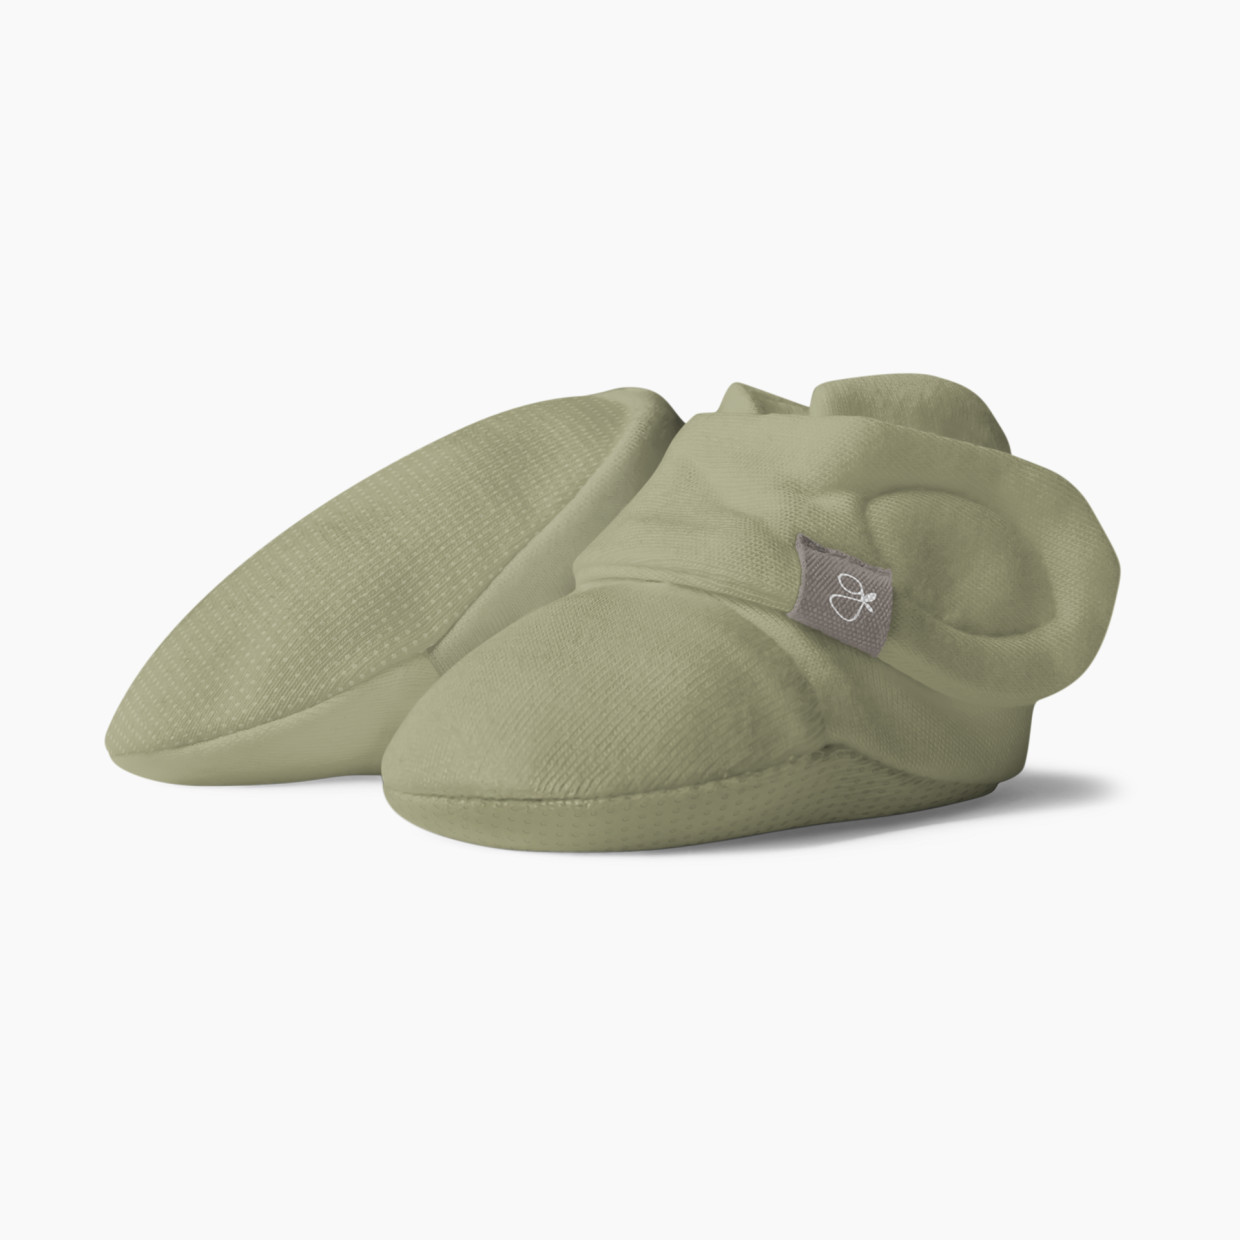 Goumi Kids Stay On Baby Boots - Artichoke, 0-3 Months.